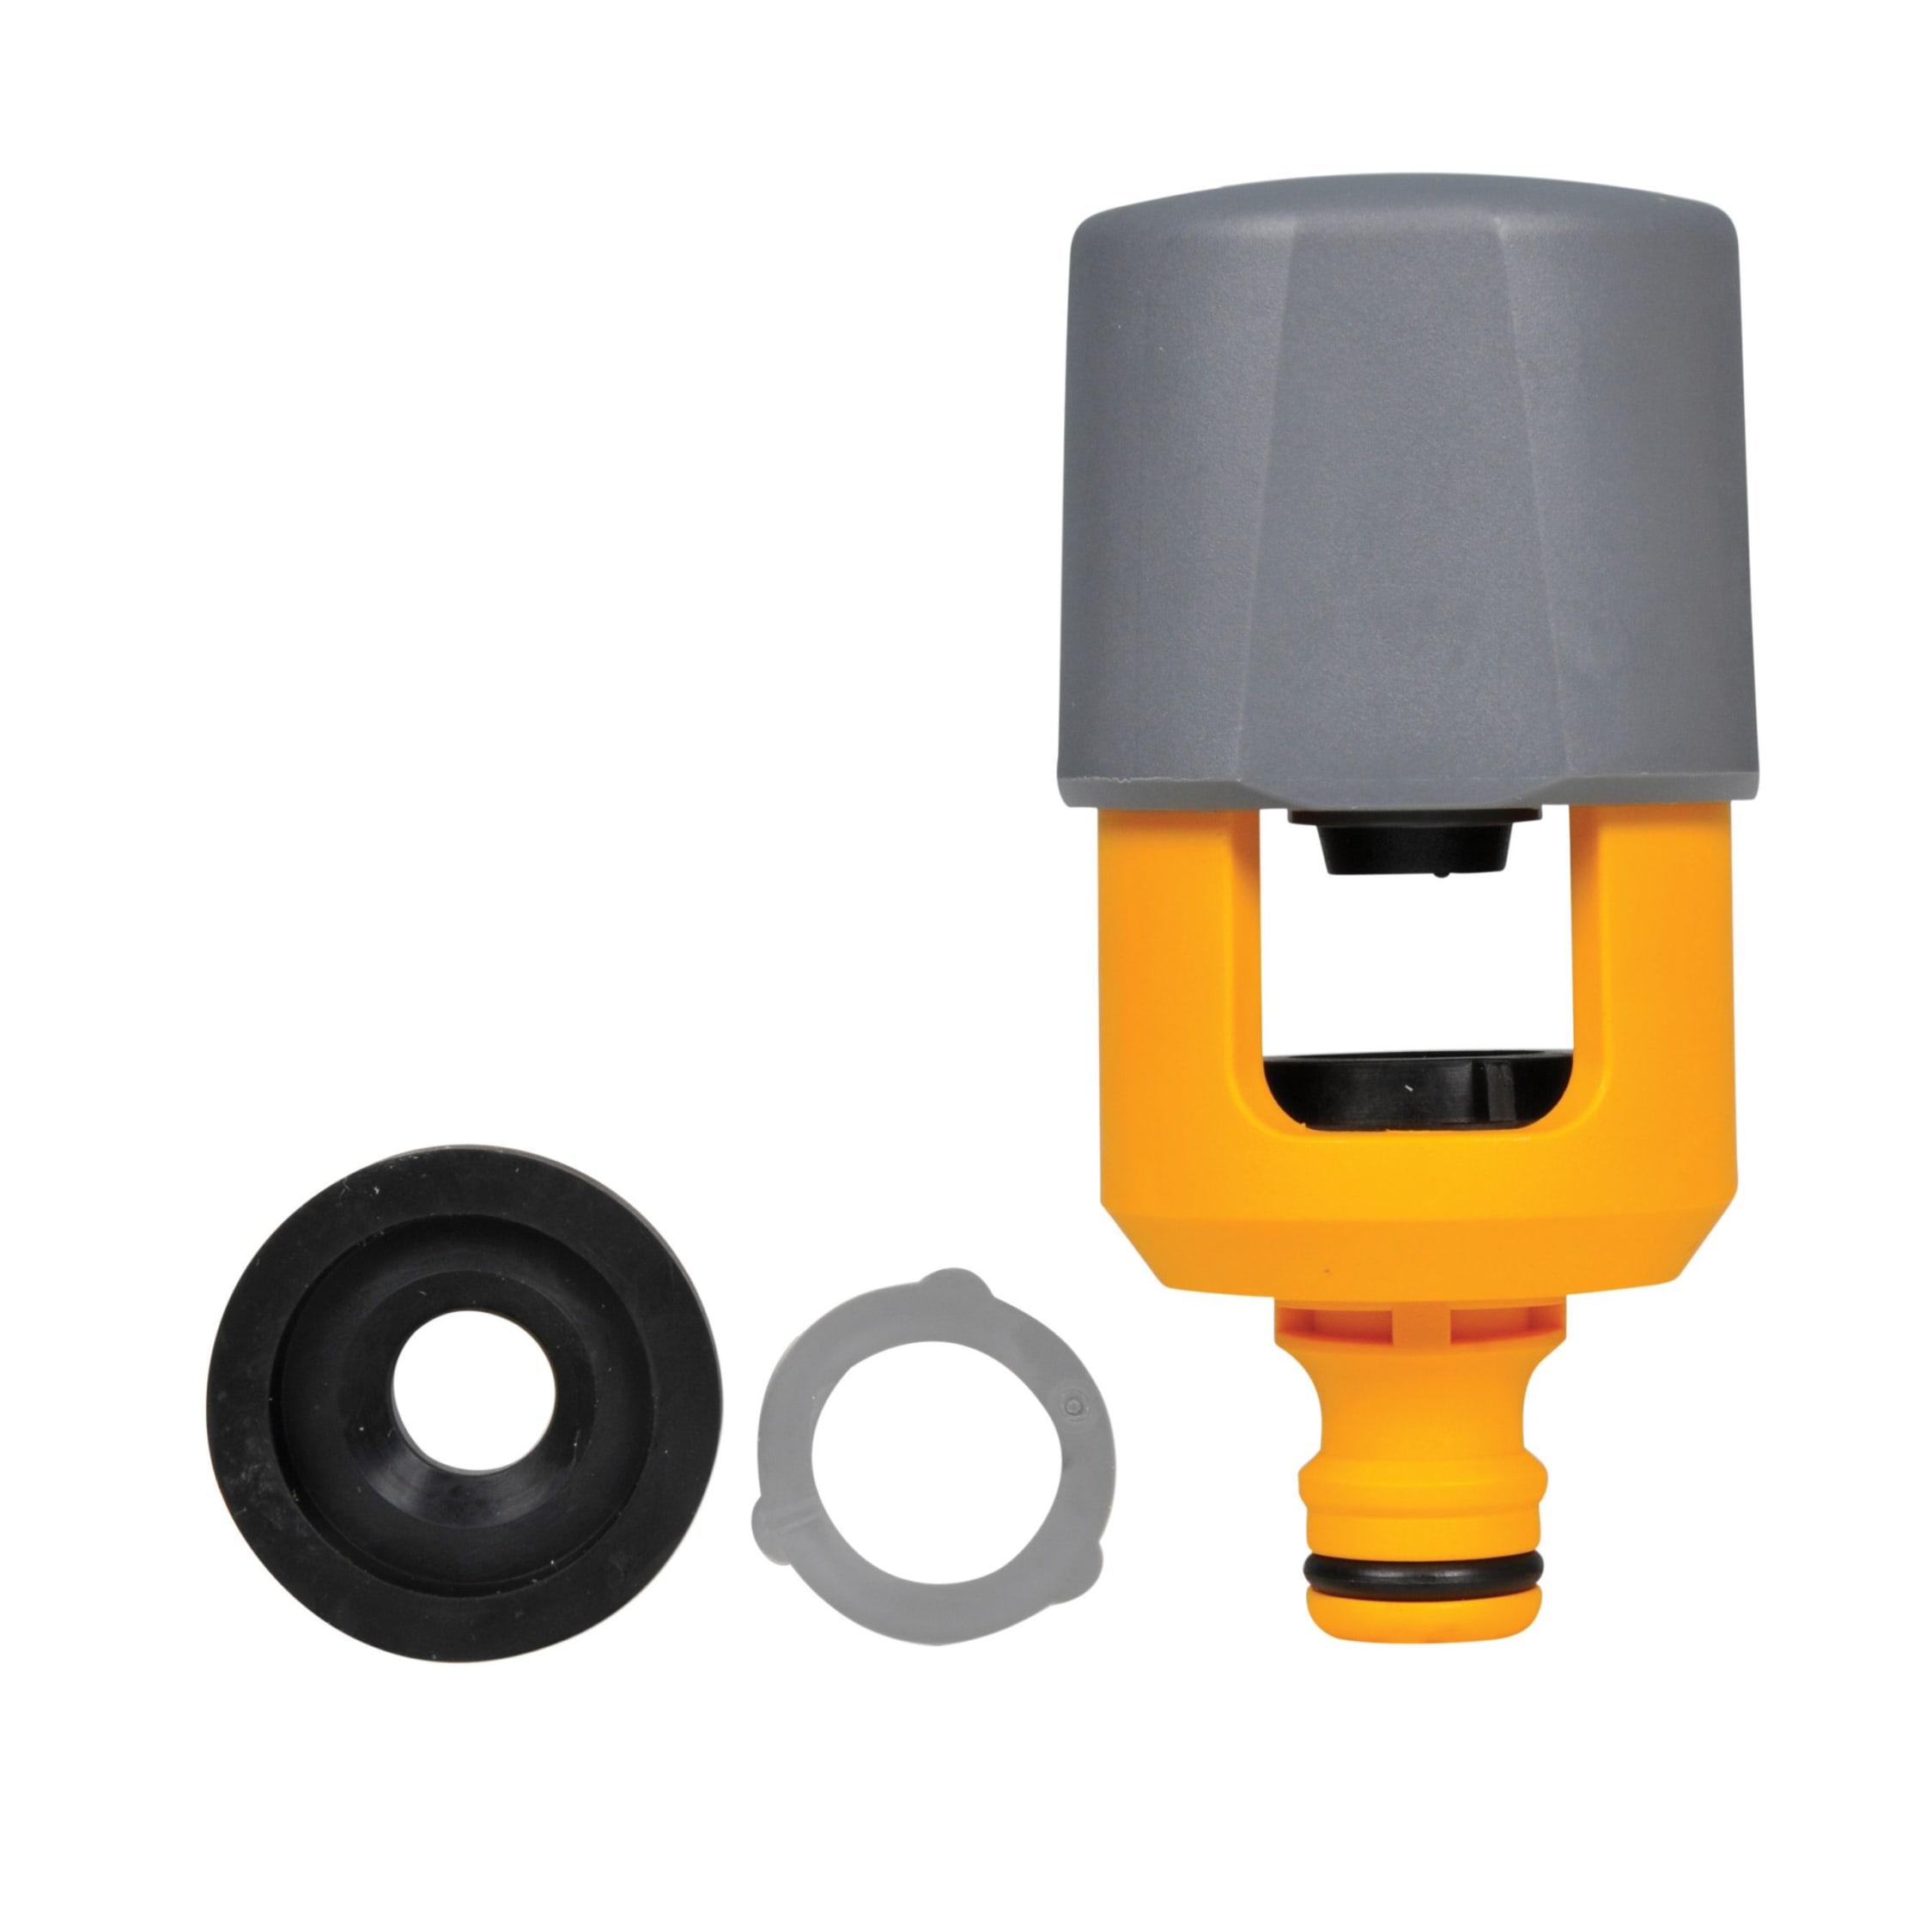 Hozelock Kitchen Mixer Tap to Hose Pipe Connector | Wickes.co.uk